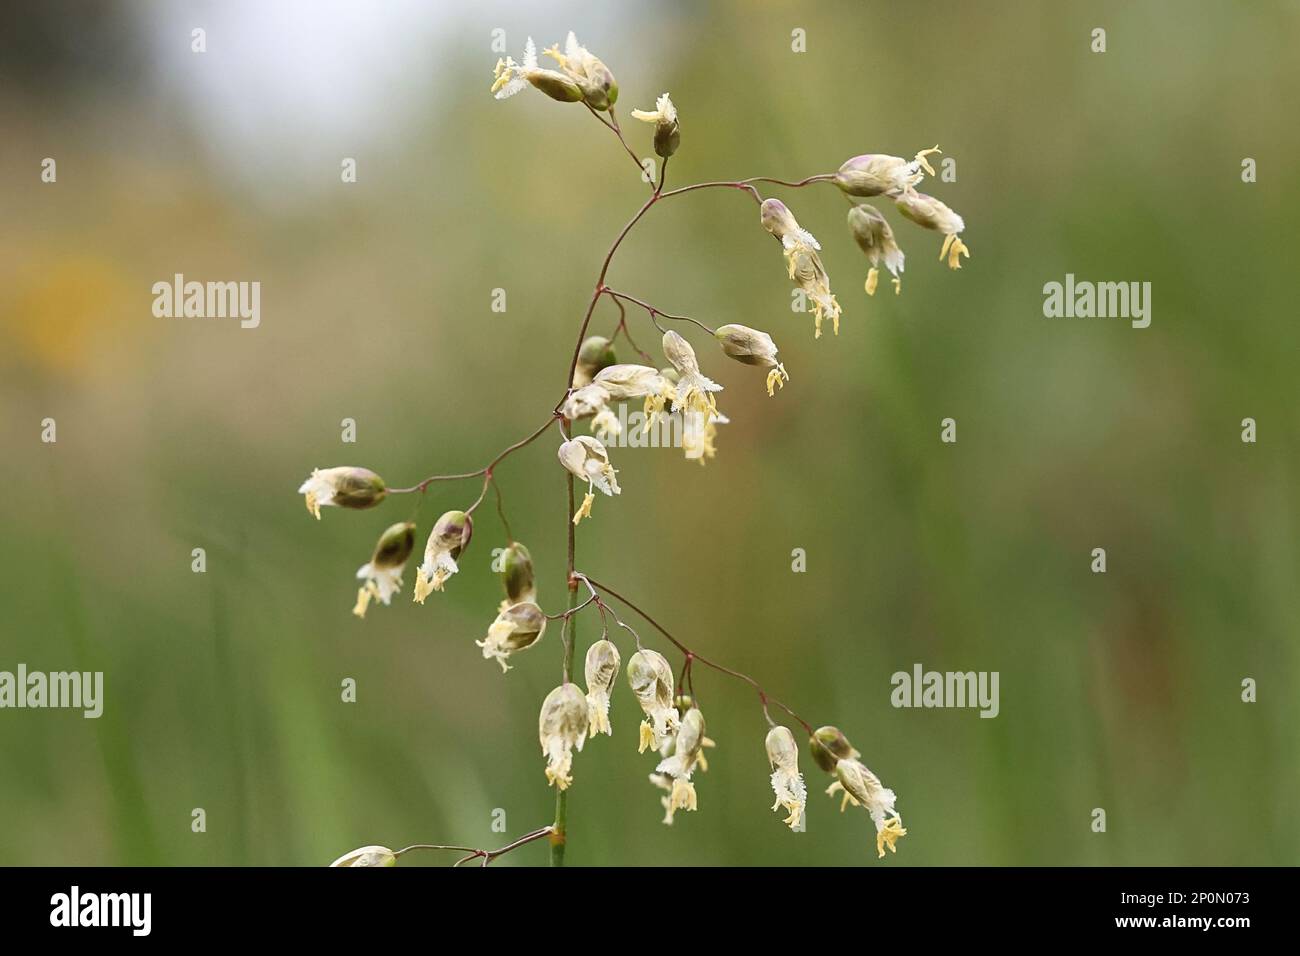 Anthoxanthum hirtum, previously Hierochloe odorata, commonly known as northern sweetgrass, wild plant from Finland Stock Photo